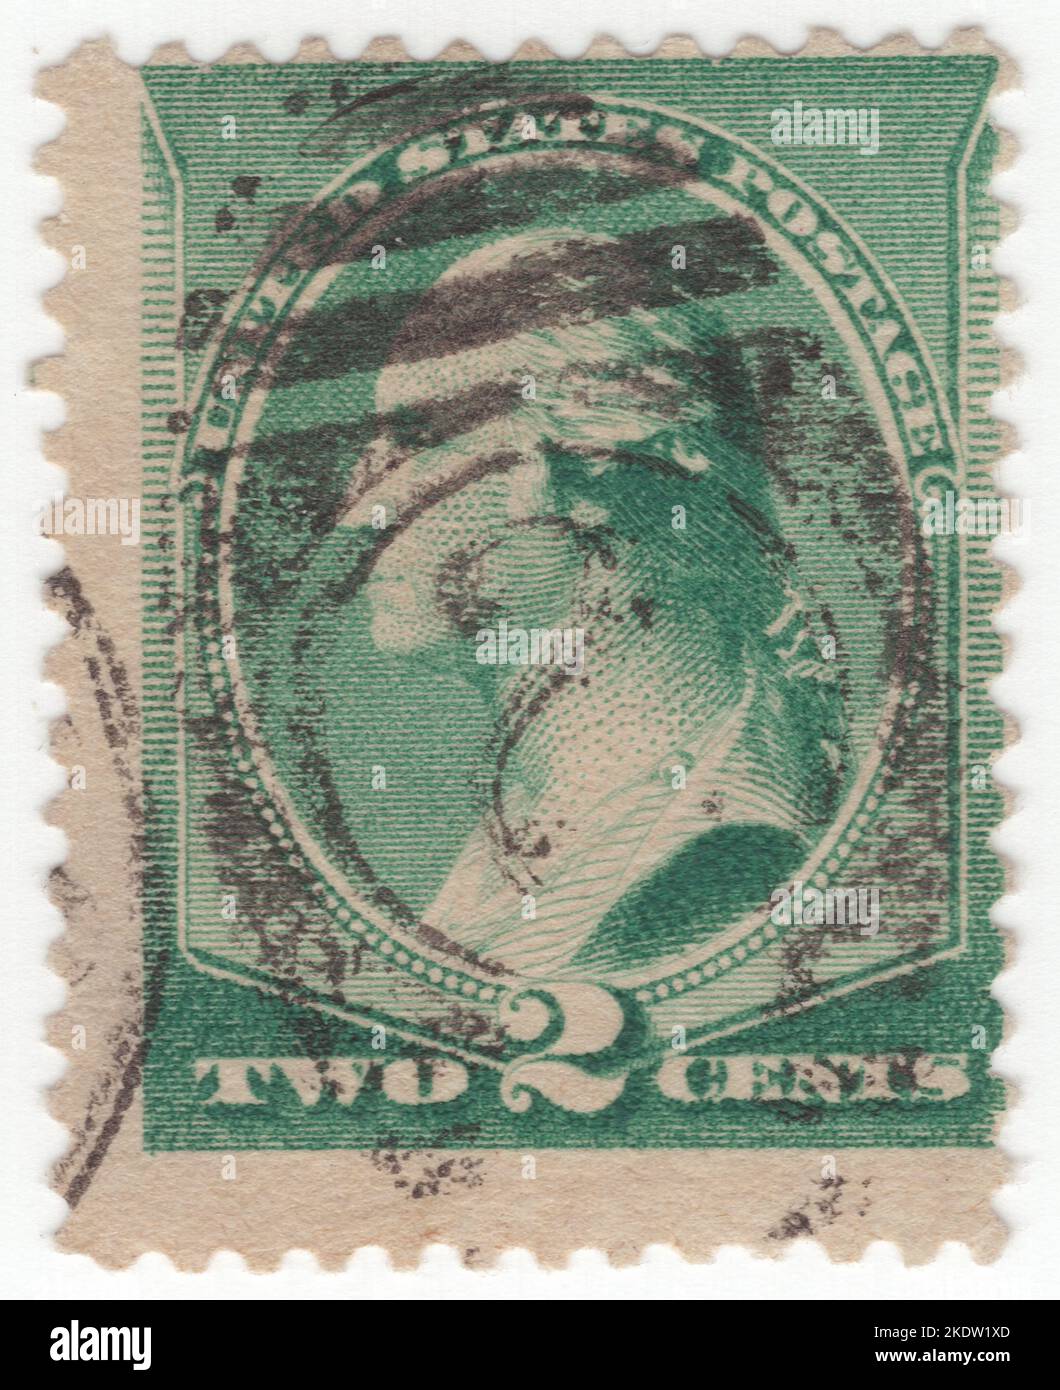 USA - 1887: An 2 cents green  postage stamp depicting portrait of George Washington. American military officer, statesman, and Founding Father who served as the first president of the United States from 1789 to 1797. Appointed by the Continental Congress as commander of the Continental Army, Washington led the Patriot forces to victory in the American Revolutionary War and served as the president of the Constitutional Convention of 1787, which created the Constitution of the United States and the American federal government. Washington has been called the 'Father of his Country' Stock Photo